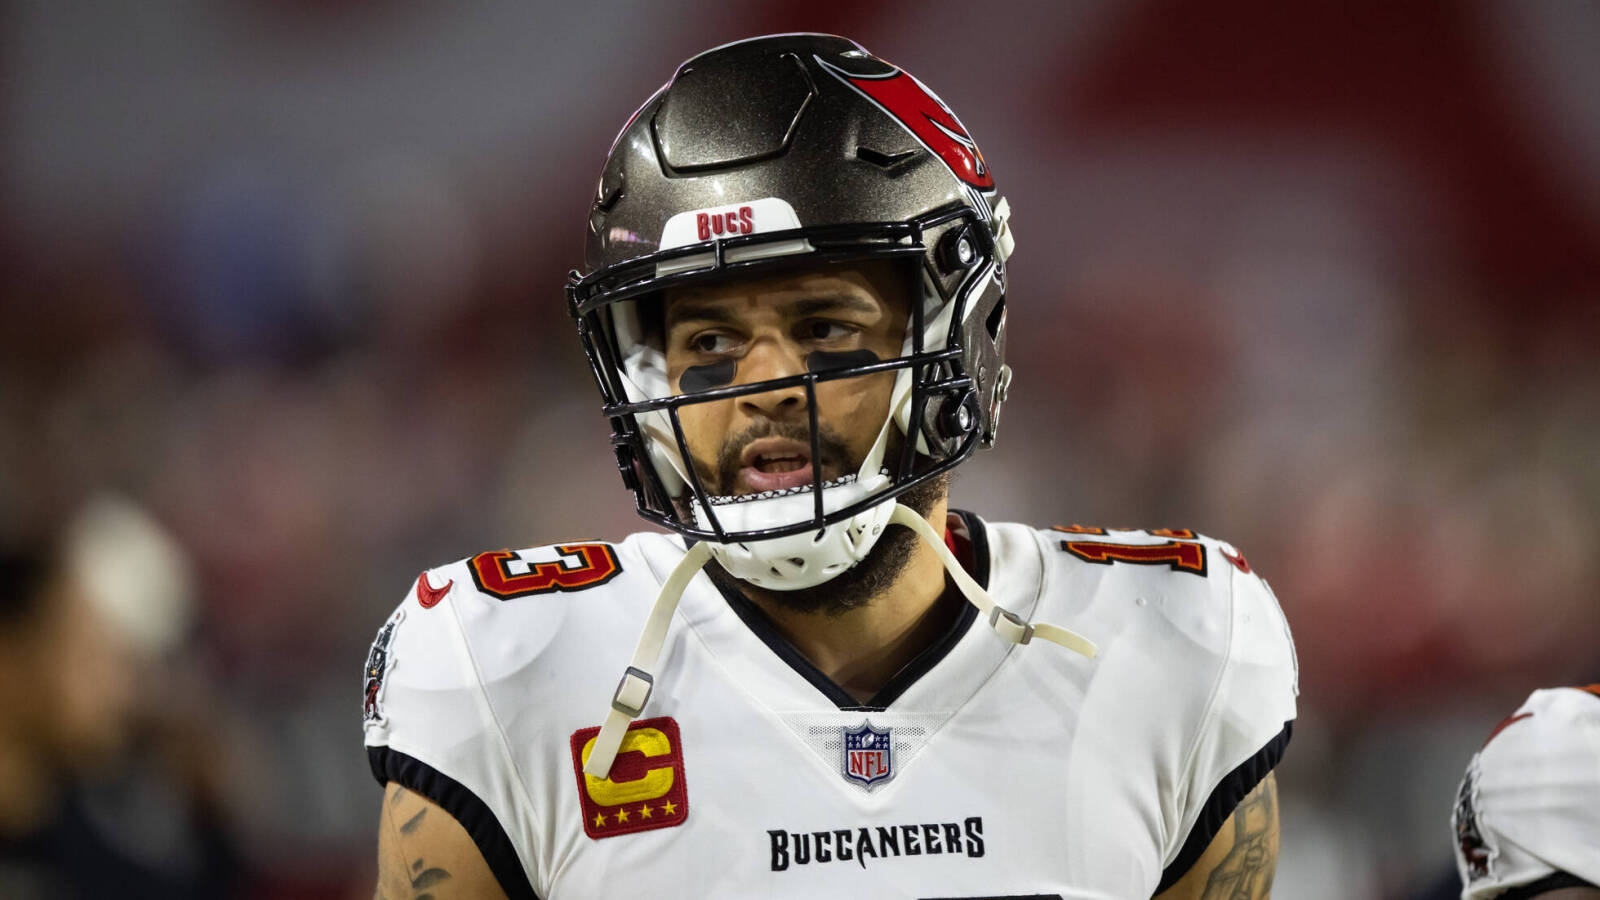 Buccaneers' Mike Evans opens up about Johnny Manziel revelations